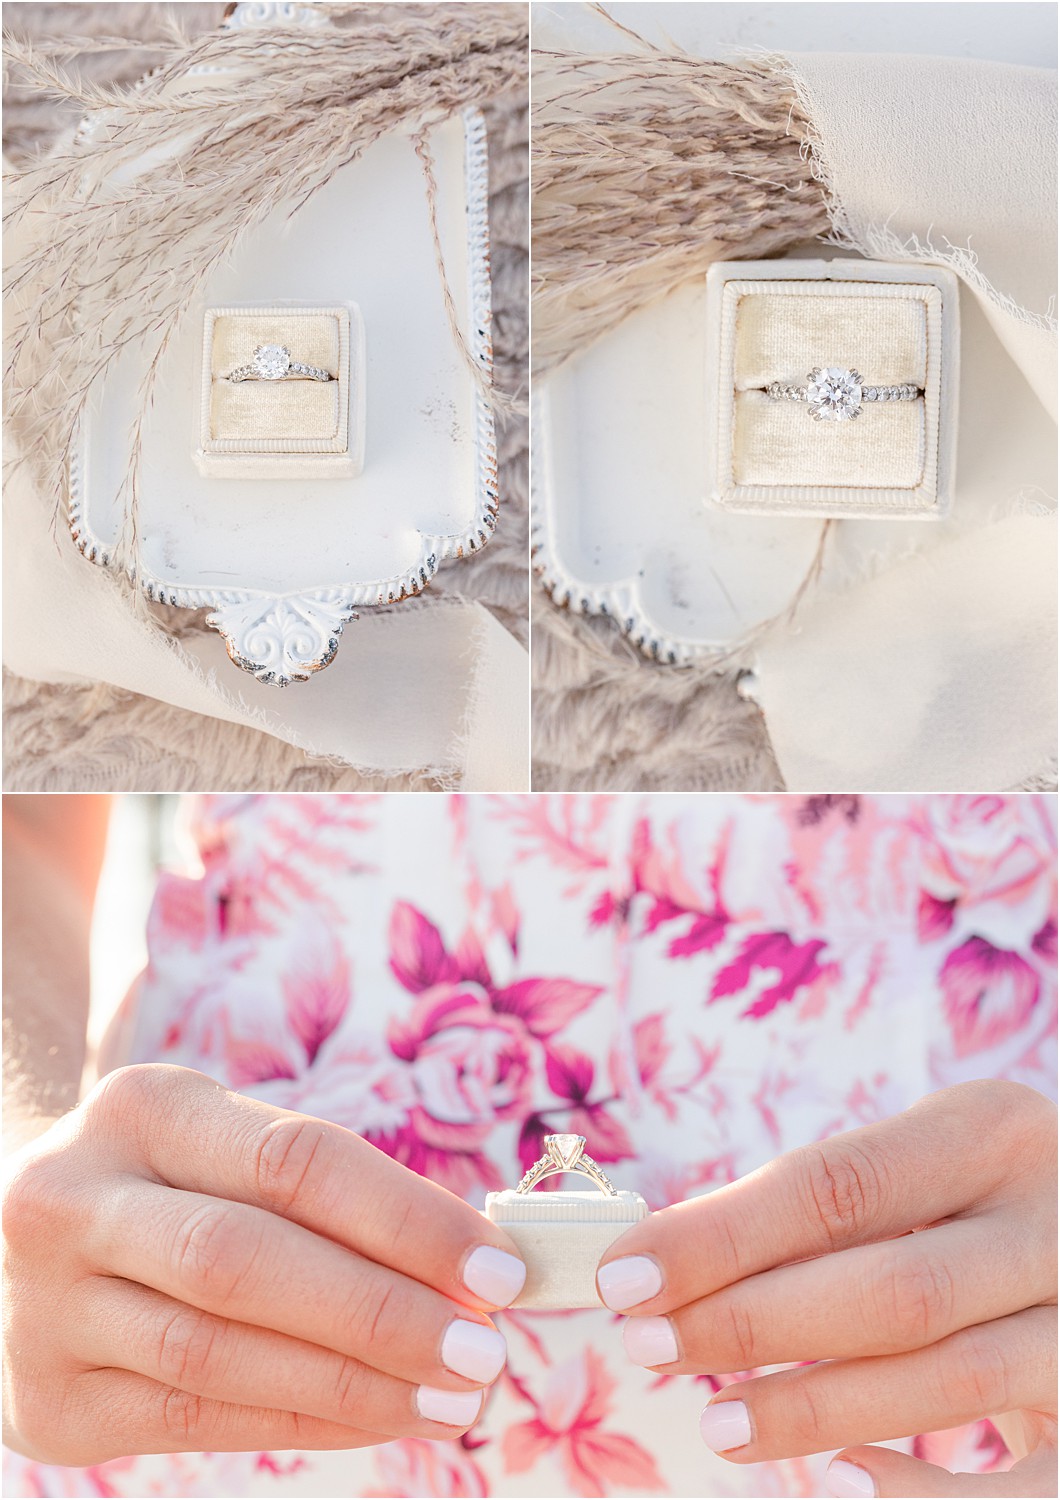 Engagement ring from Belmar Marina + Beach Engagement Session